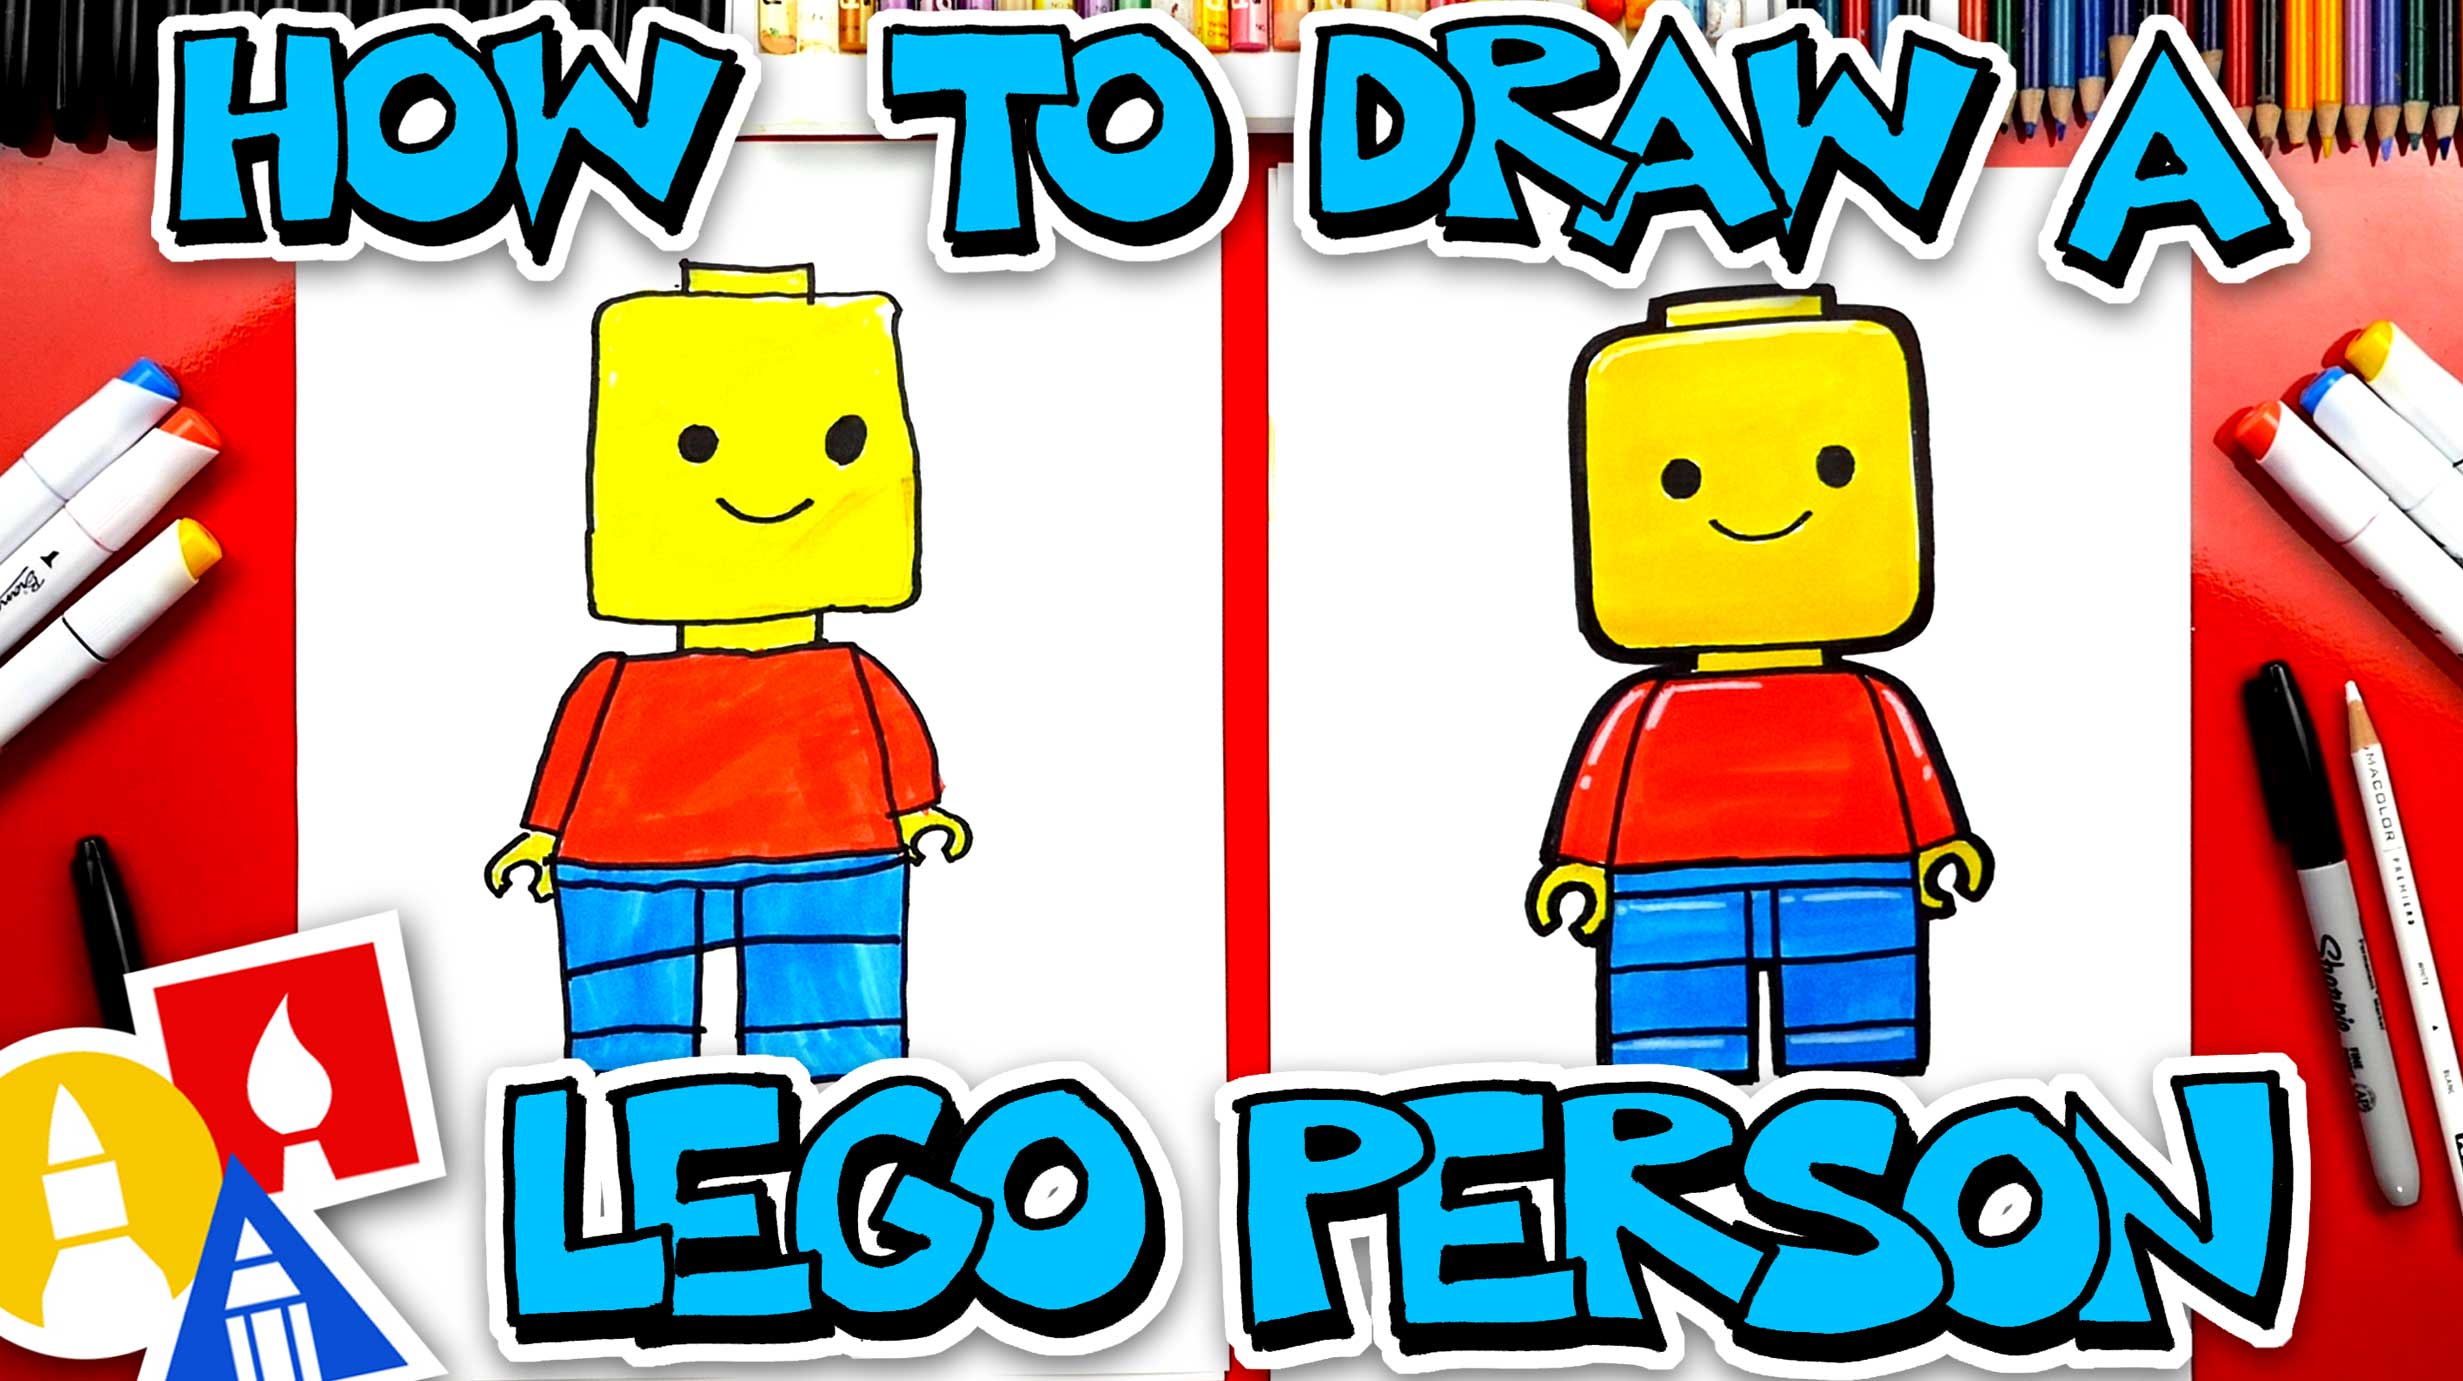 How To Draw A Lego Minifigure Step By Step - BEST GAMES WALKTHROUGH